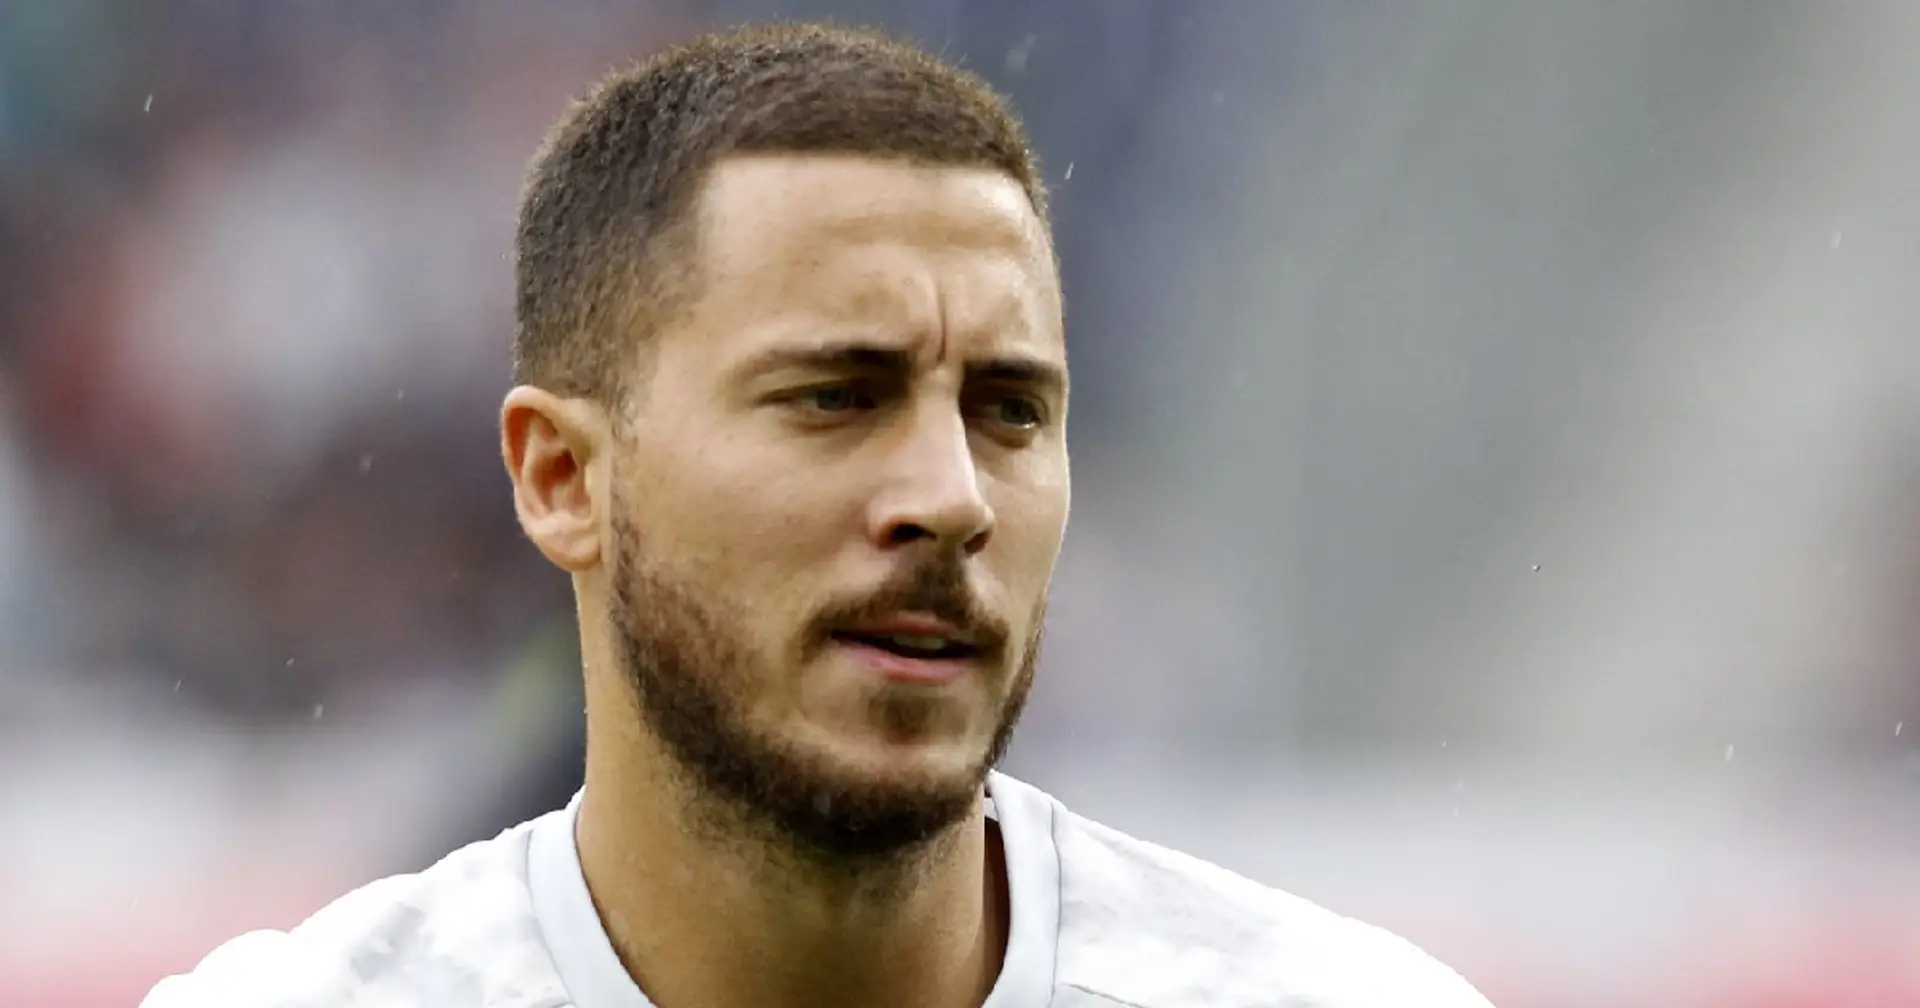 4 major reasons why Real Madrid won't sell Eden Hazard - as stated by fan